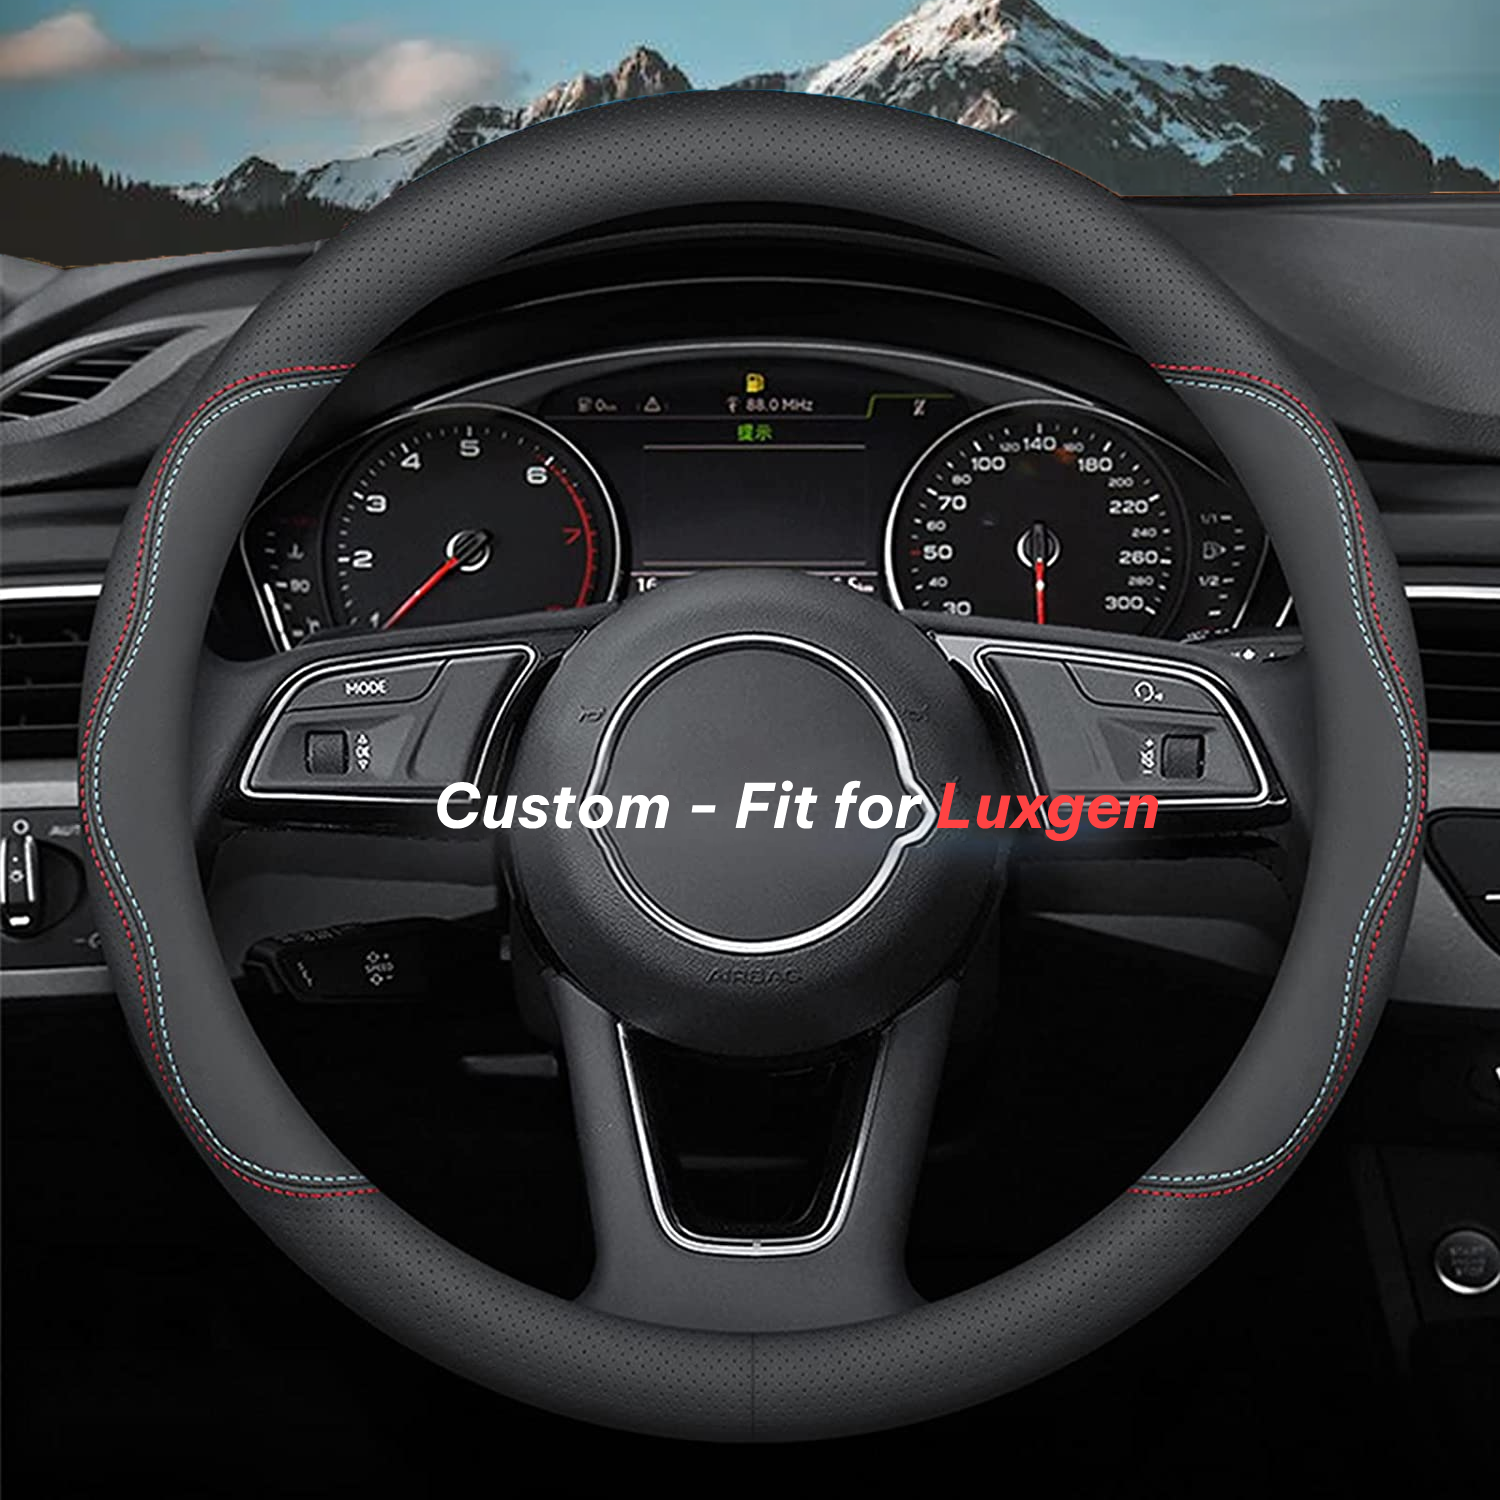 Car Steering Wheel Cover 2024 Update Version, Custom-Fit for Car, Premium Leather Car Steering Wheel Cover with Logo, Car Accessories DLLE222